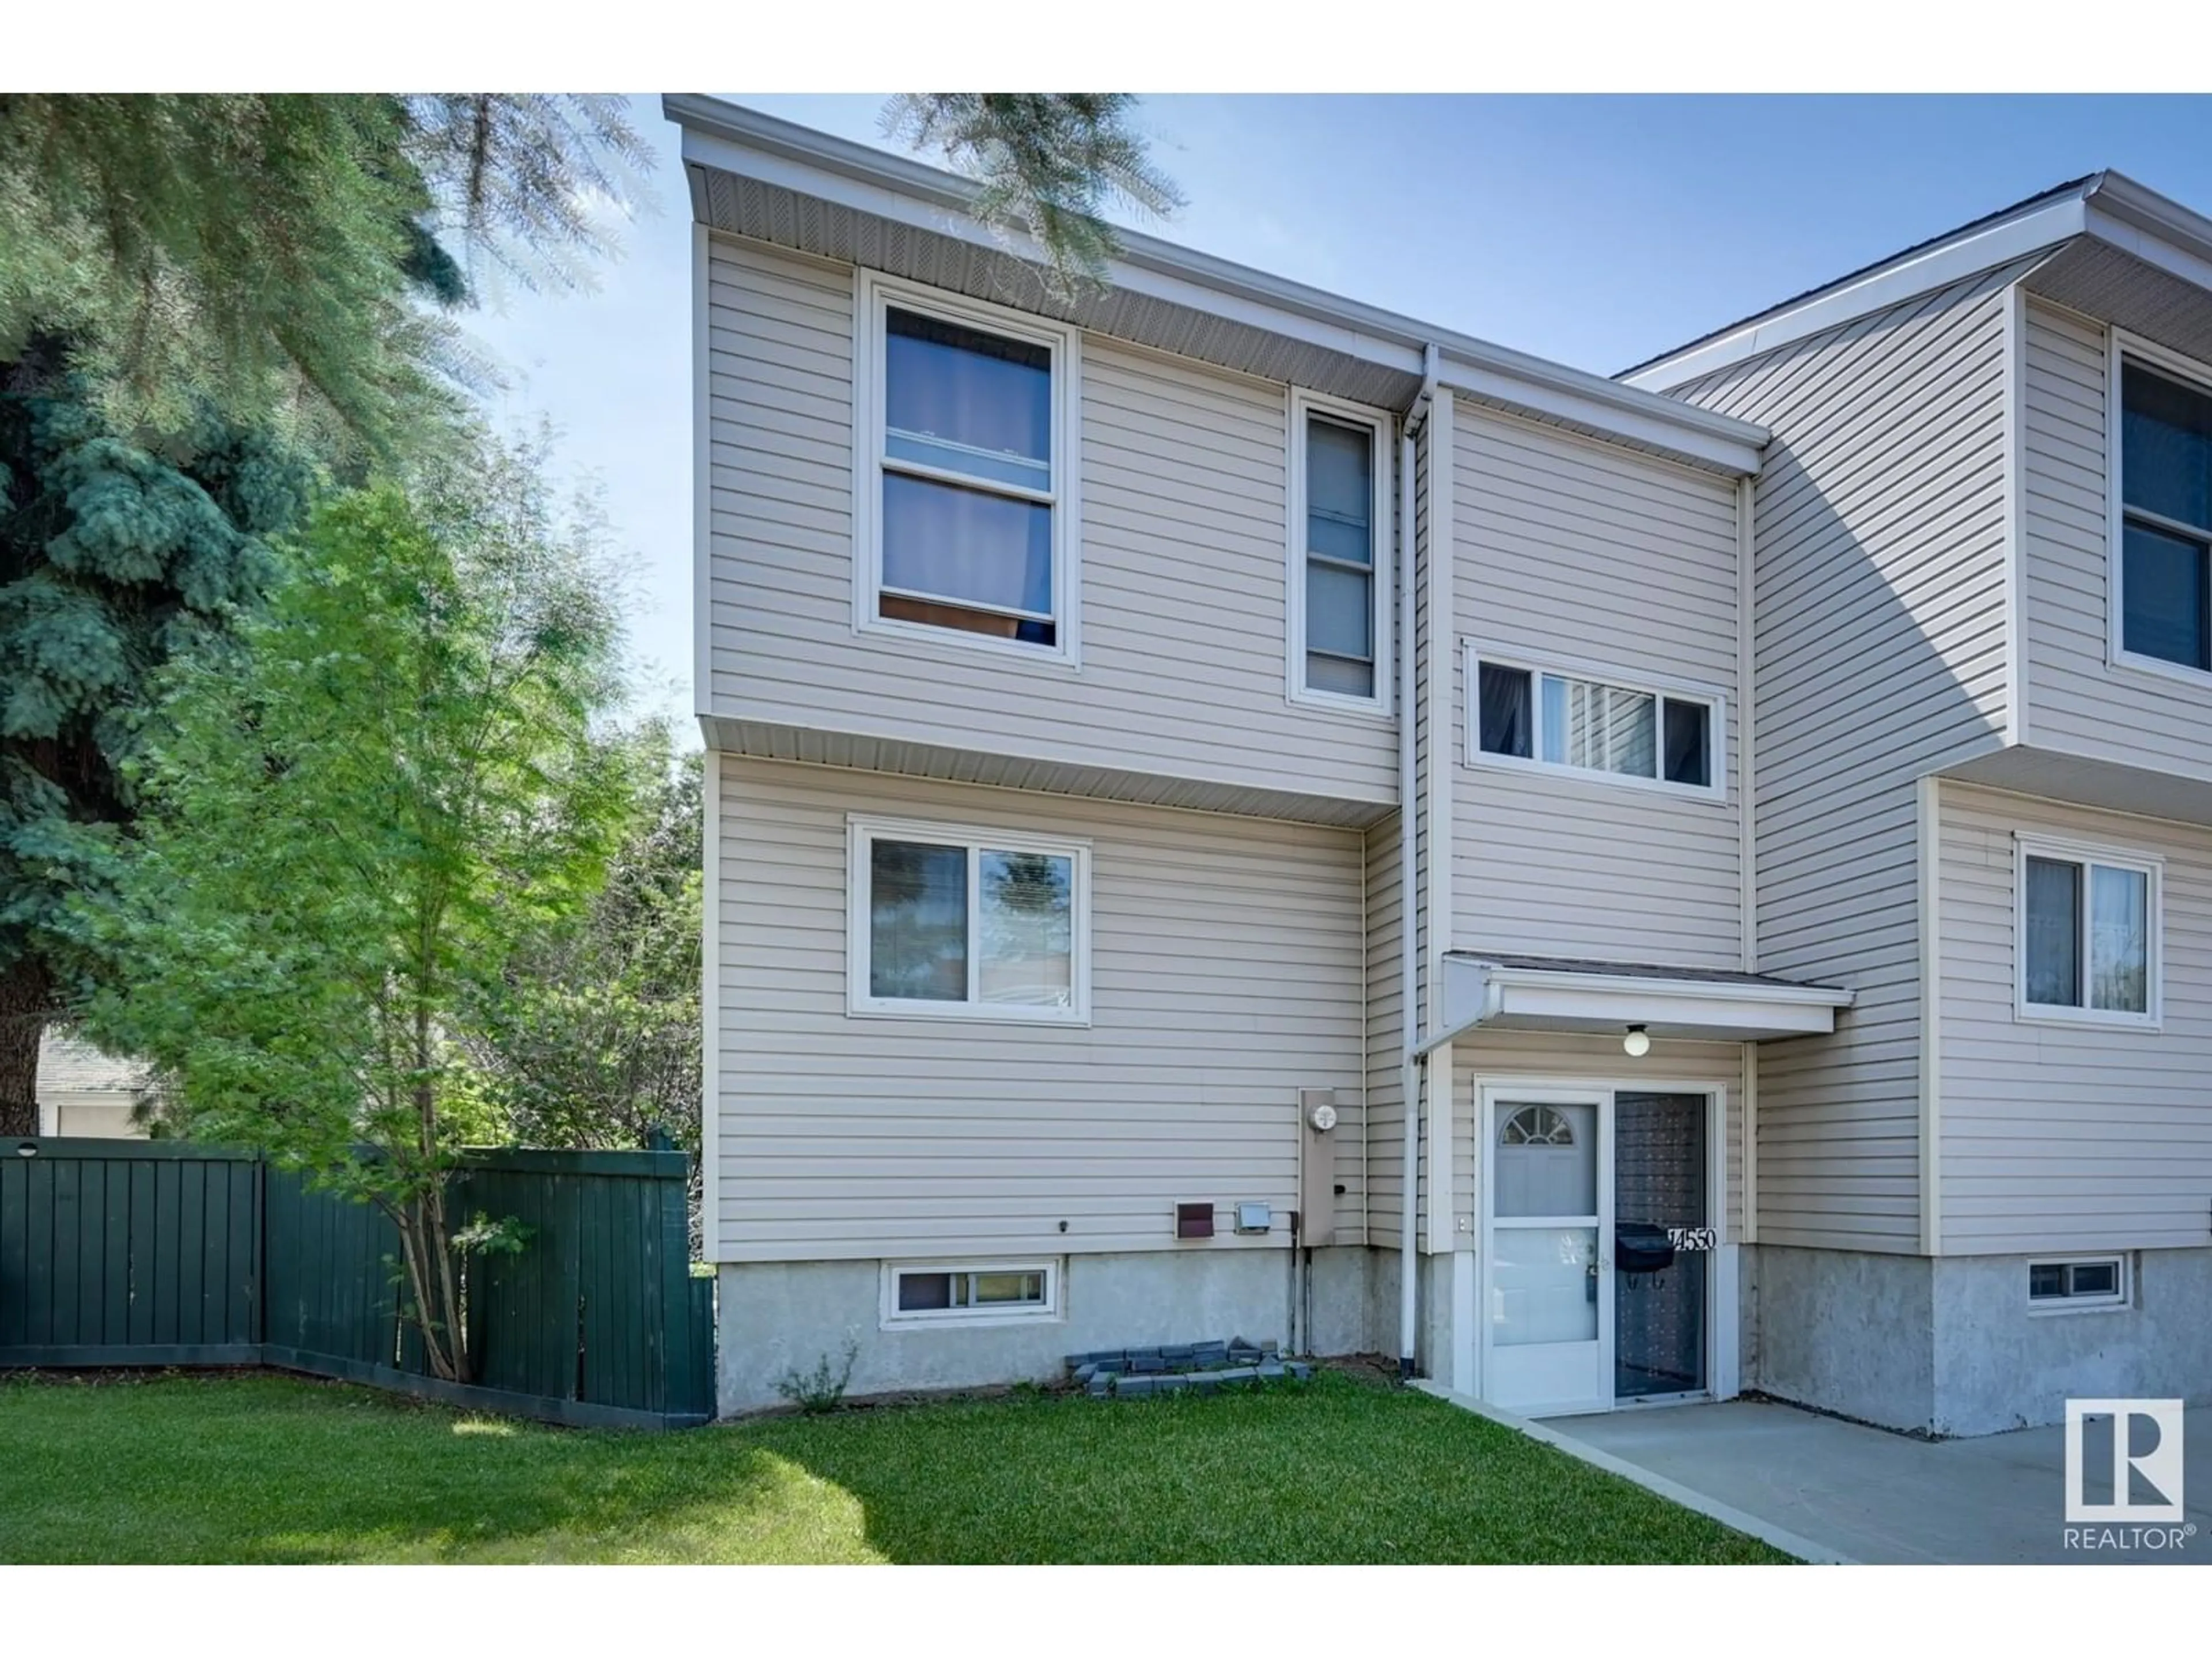 A pic from exterior of the house or condo for 14550 56 ST NW, Edmonton Alberta T5A3R1